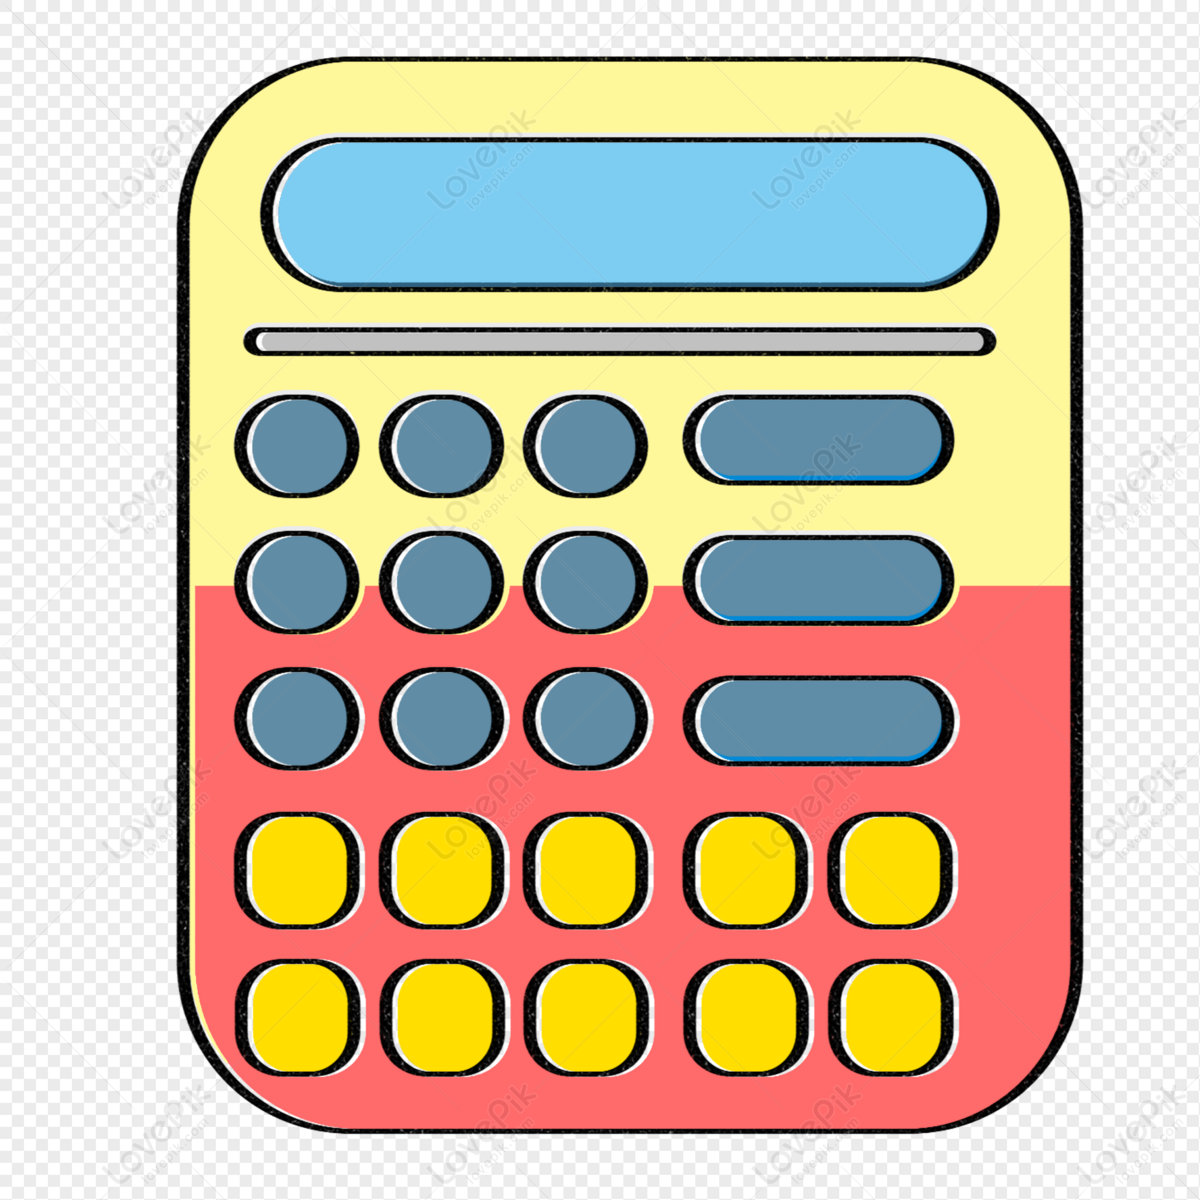 Calculator PNG Transparent Background And Clipart Image For Free Download -  Lovepik | 401434260